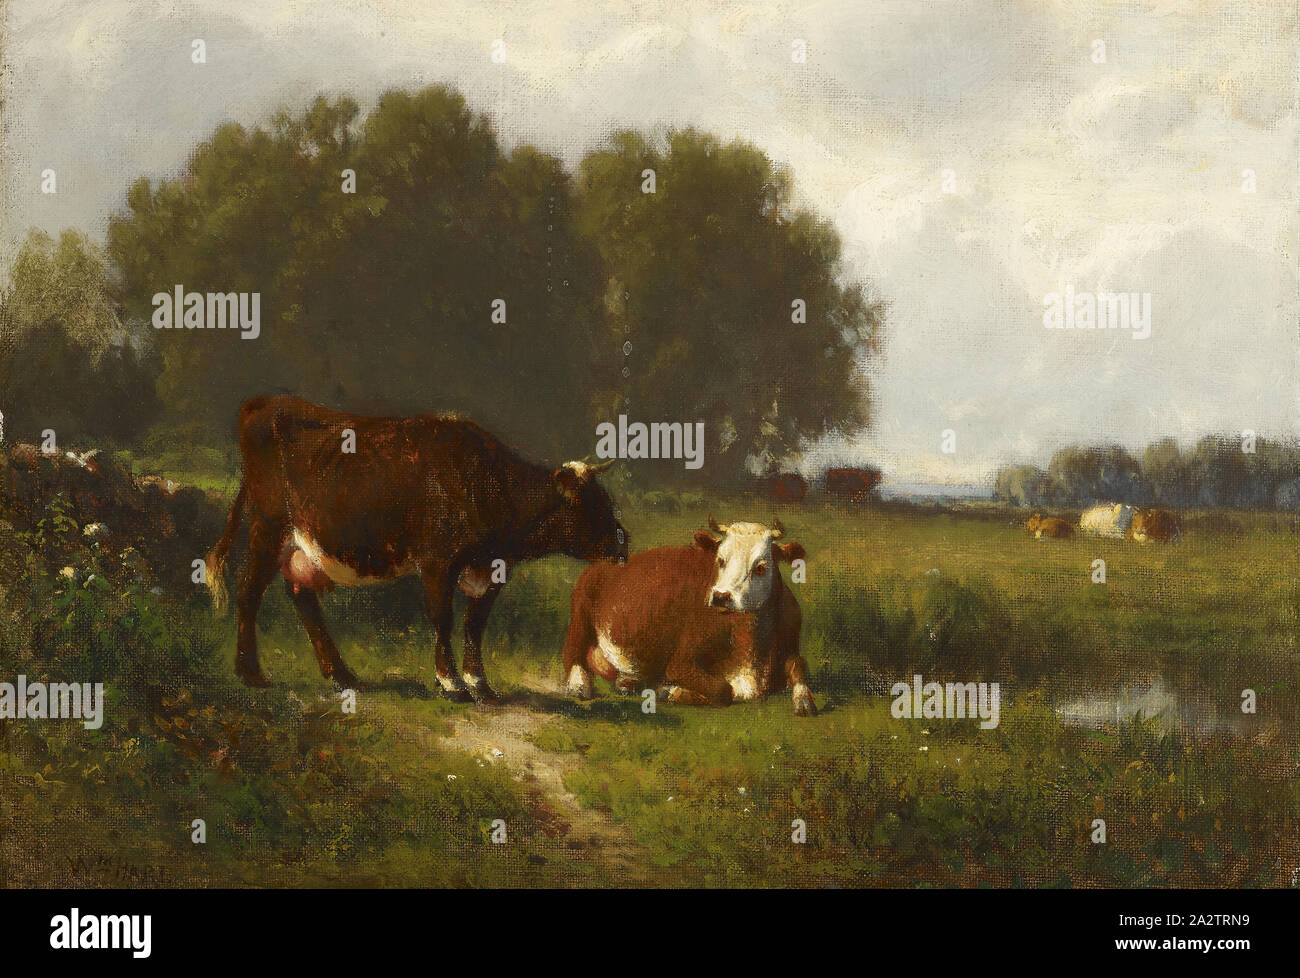 Landscape with Cows, William M Hart (American, 1823-1894), date unknown, oil on canvas, 10-1/8 x 14-1/8 in. (canvas) 15-1/2 x 20 x 2 in. (framed), Signed, l.l.: Wm. HART., American Painting and Sculpture to 1945 Stock Photo